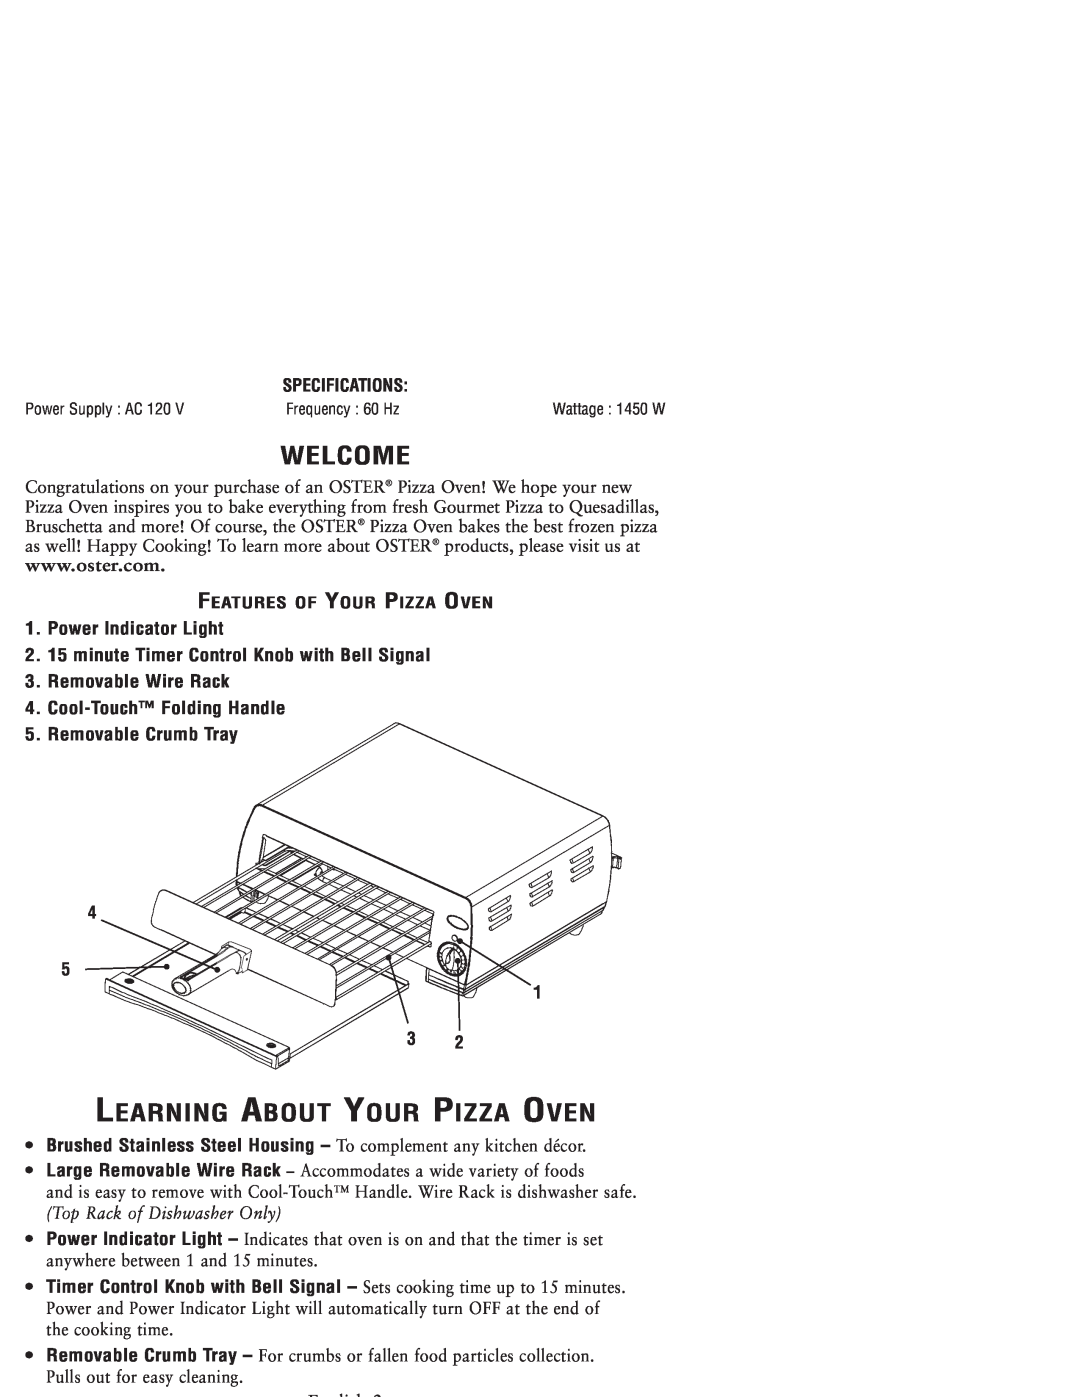 Sunbeam 3224 user manual Welcome, Learning About Your Pizza Oven, E li h 